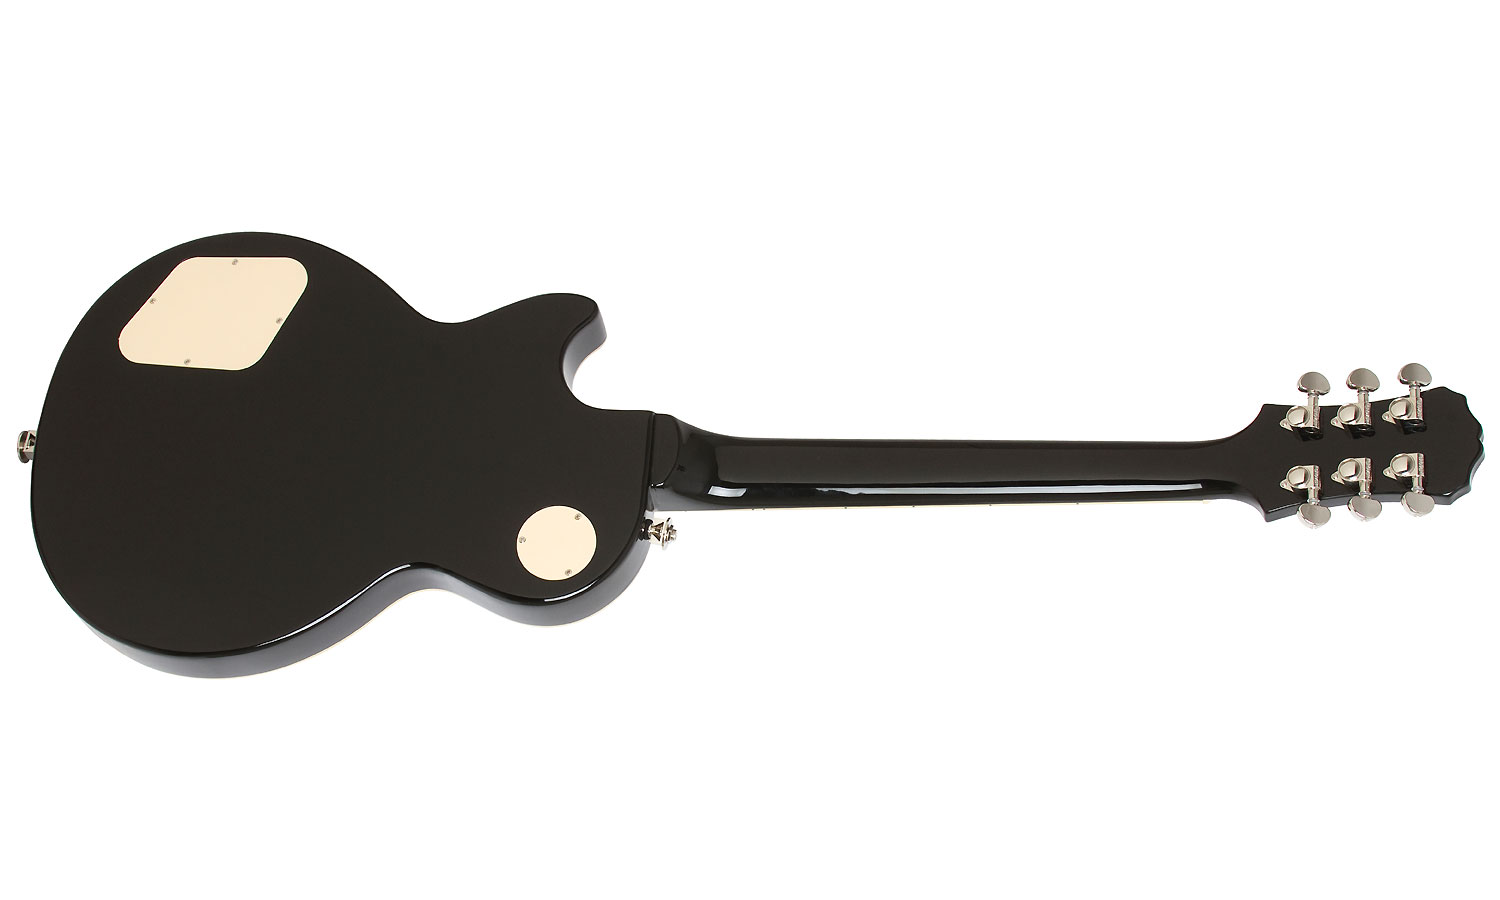 Epiphone Les Paul Tribute Plus Outfit Ch - Midnight Ebony - Single cut electric guitar - Variation 2